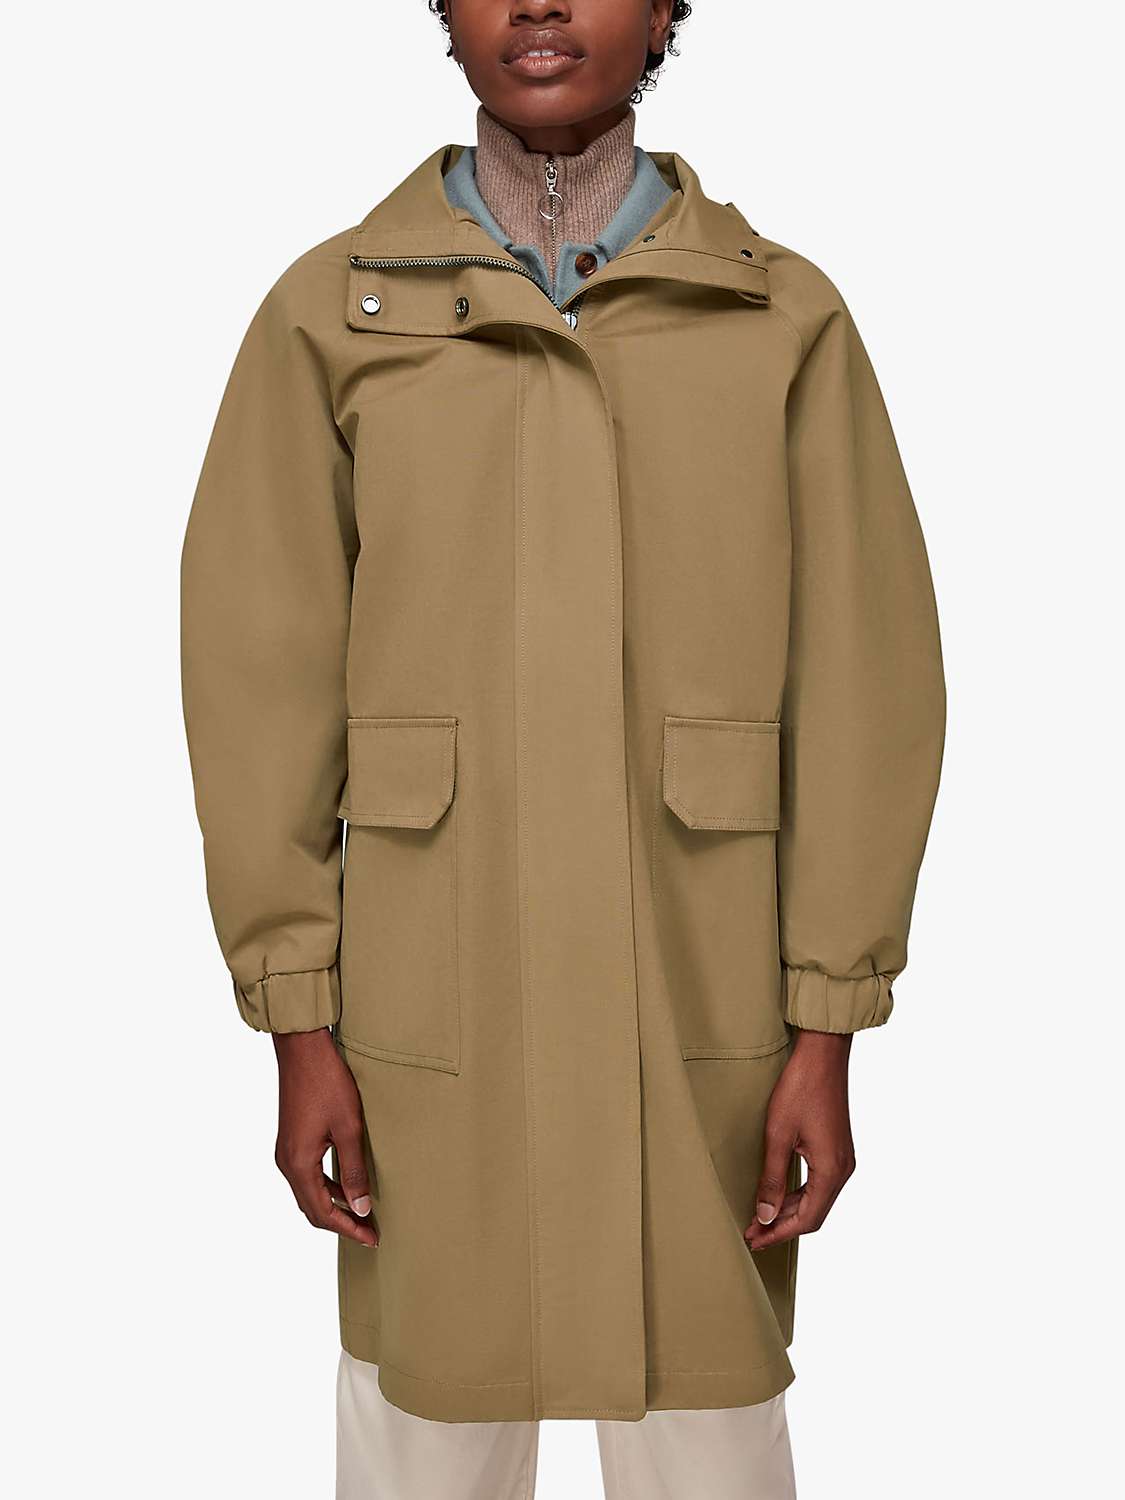 Whistles Thea Hooded Coat, Camel at John Lewis & Partners